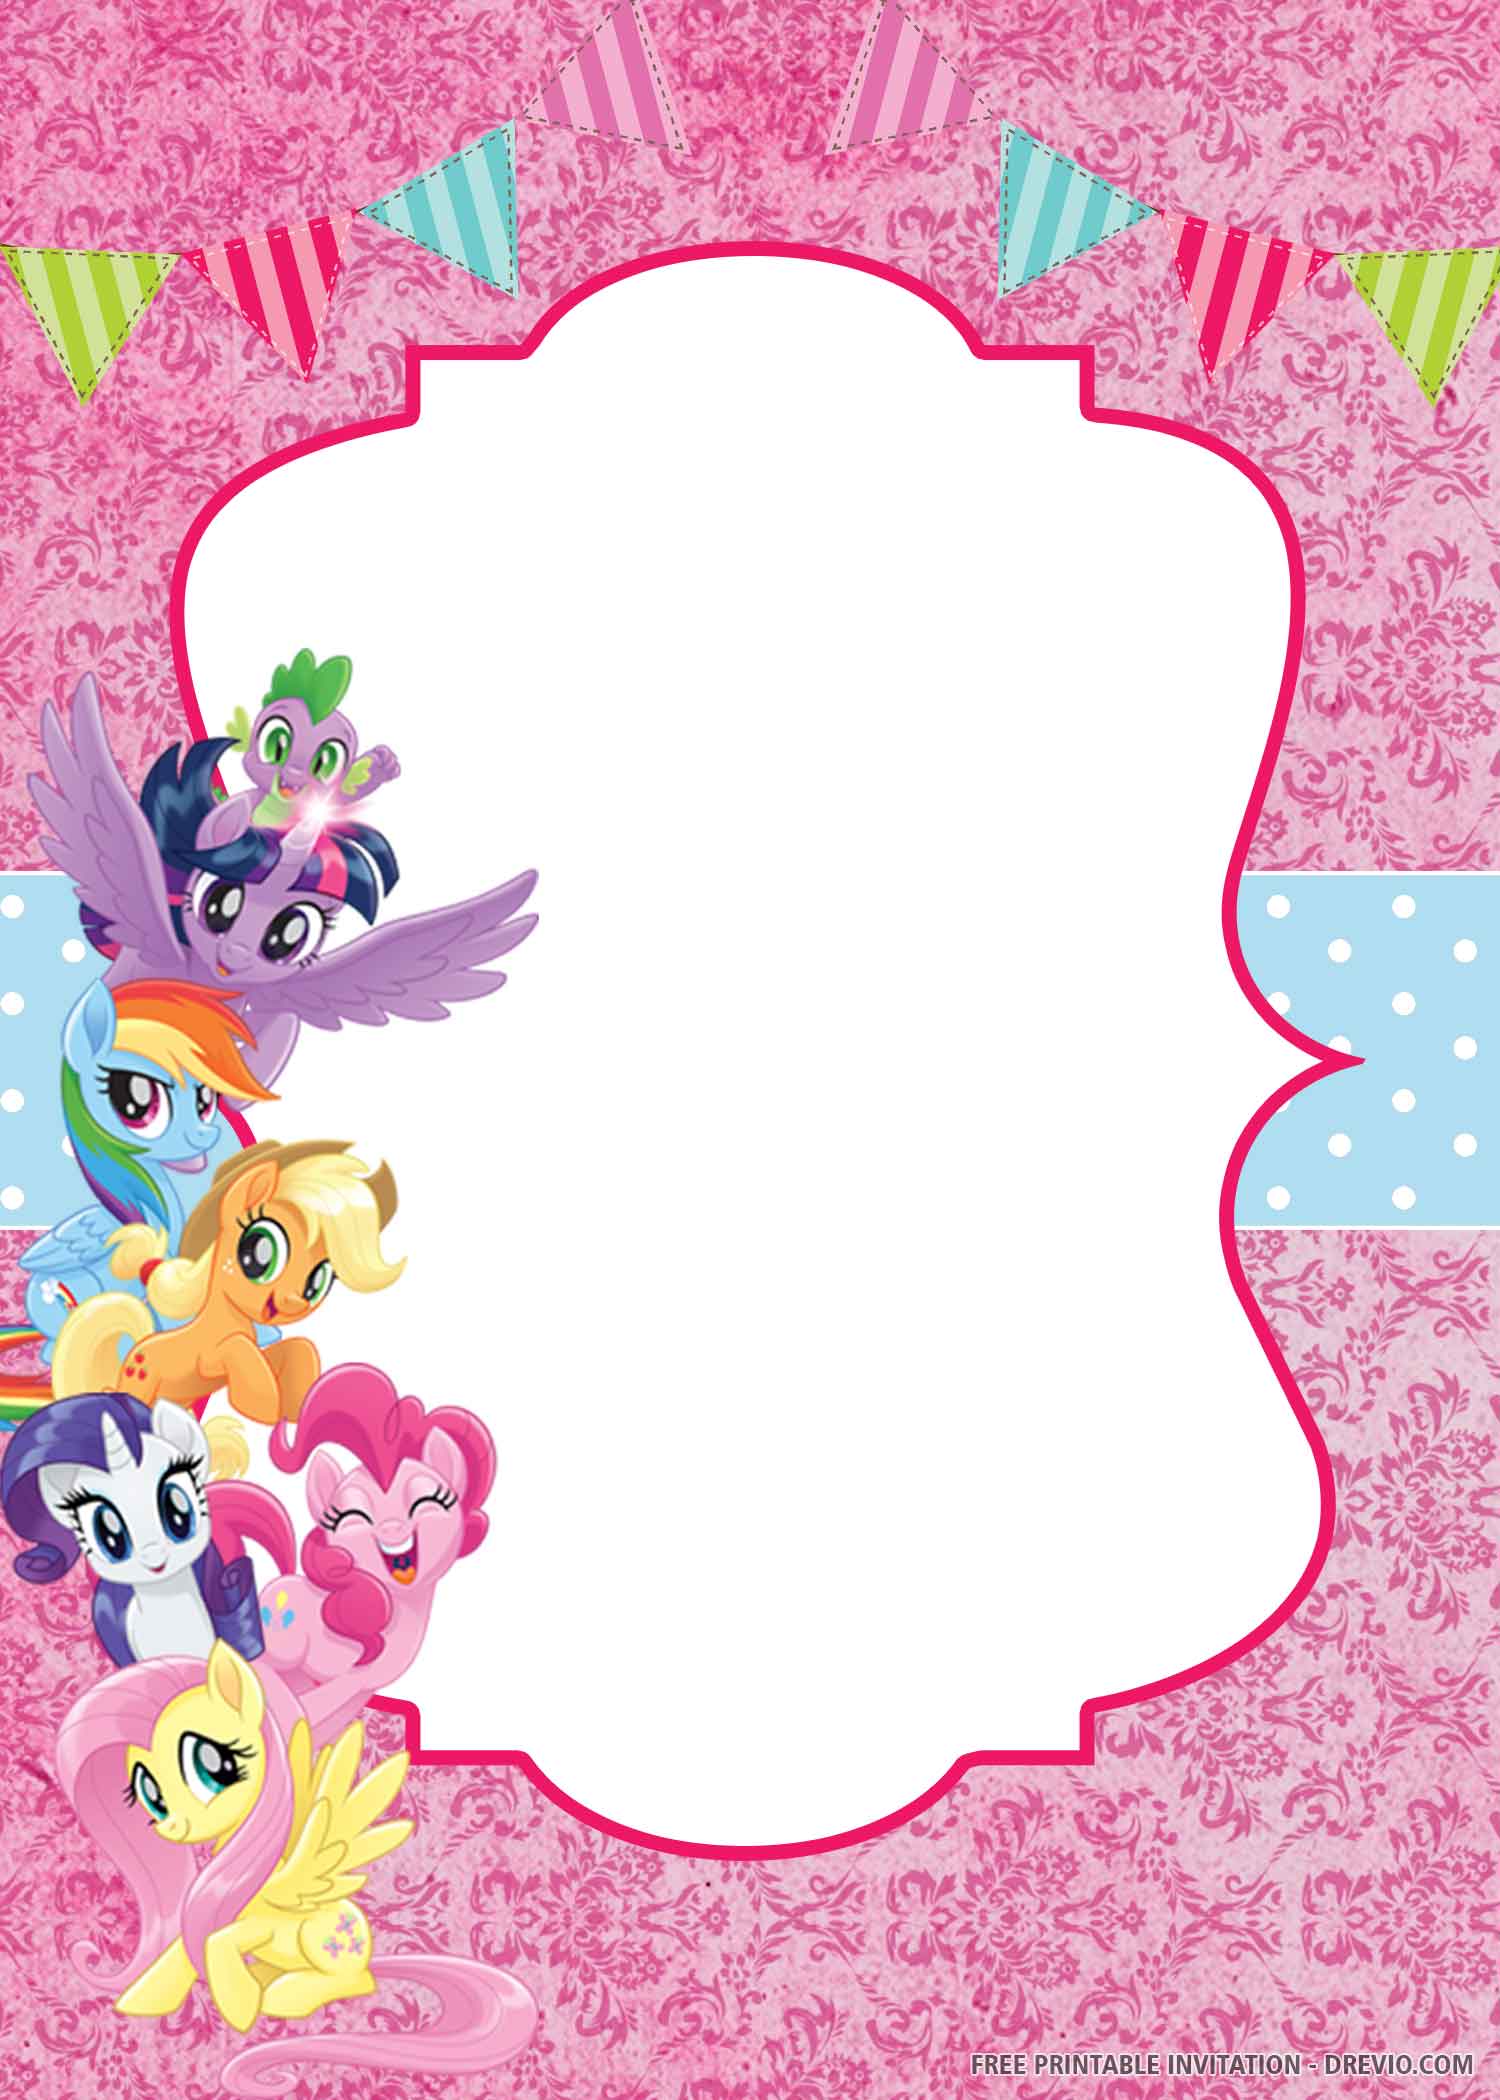 my-little-pony-invitations-template-free